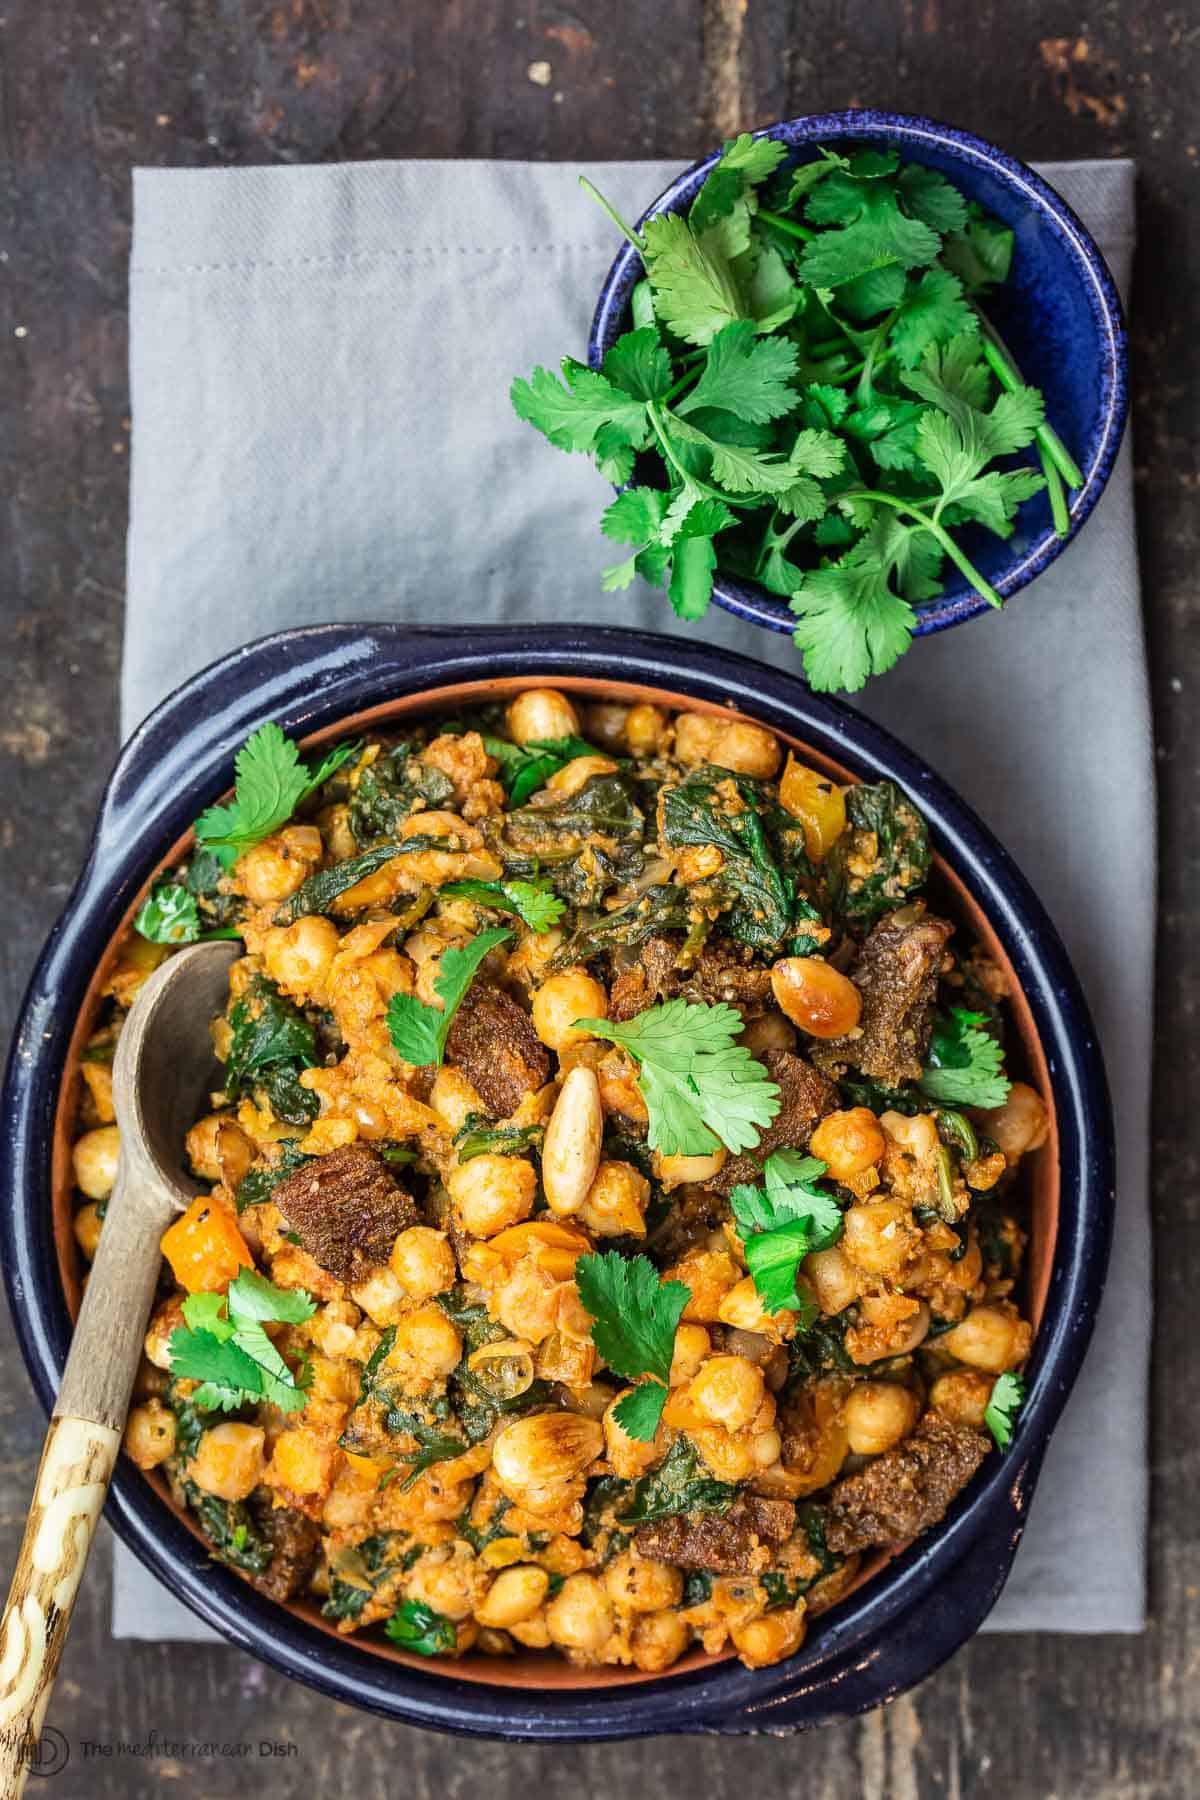 Chickpea Stew Garnished with Cilantro. More cilantro in a small bowl on the side